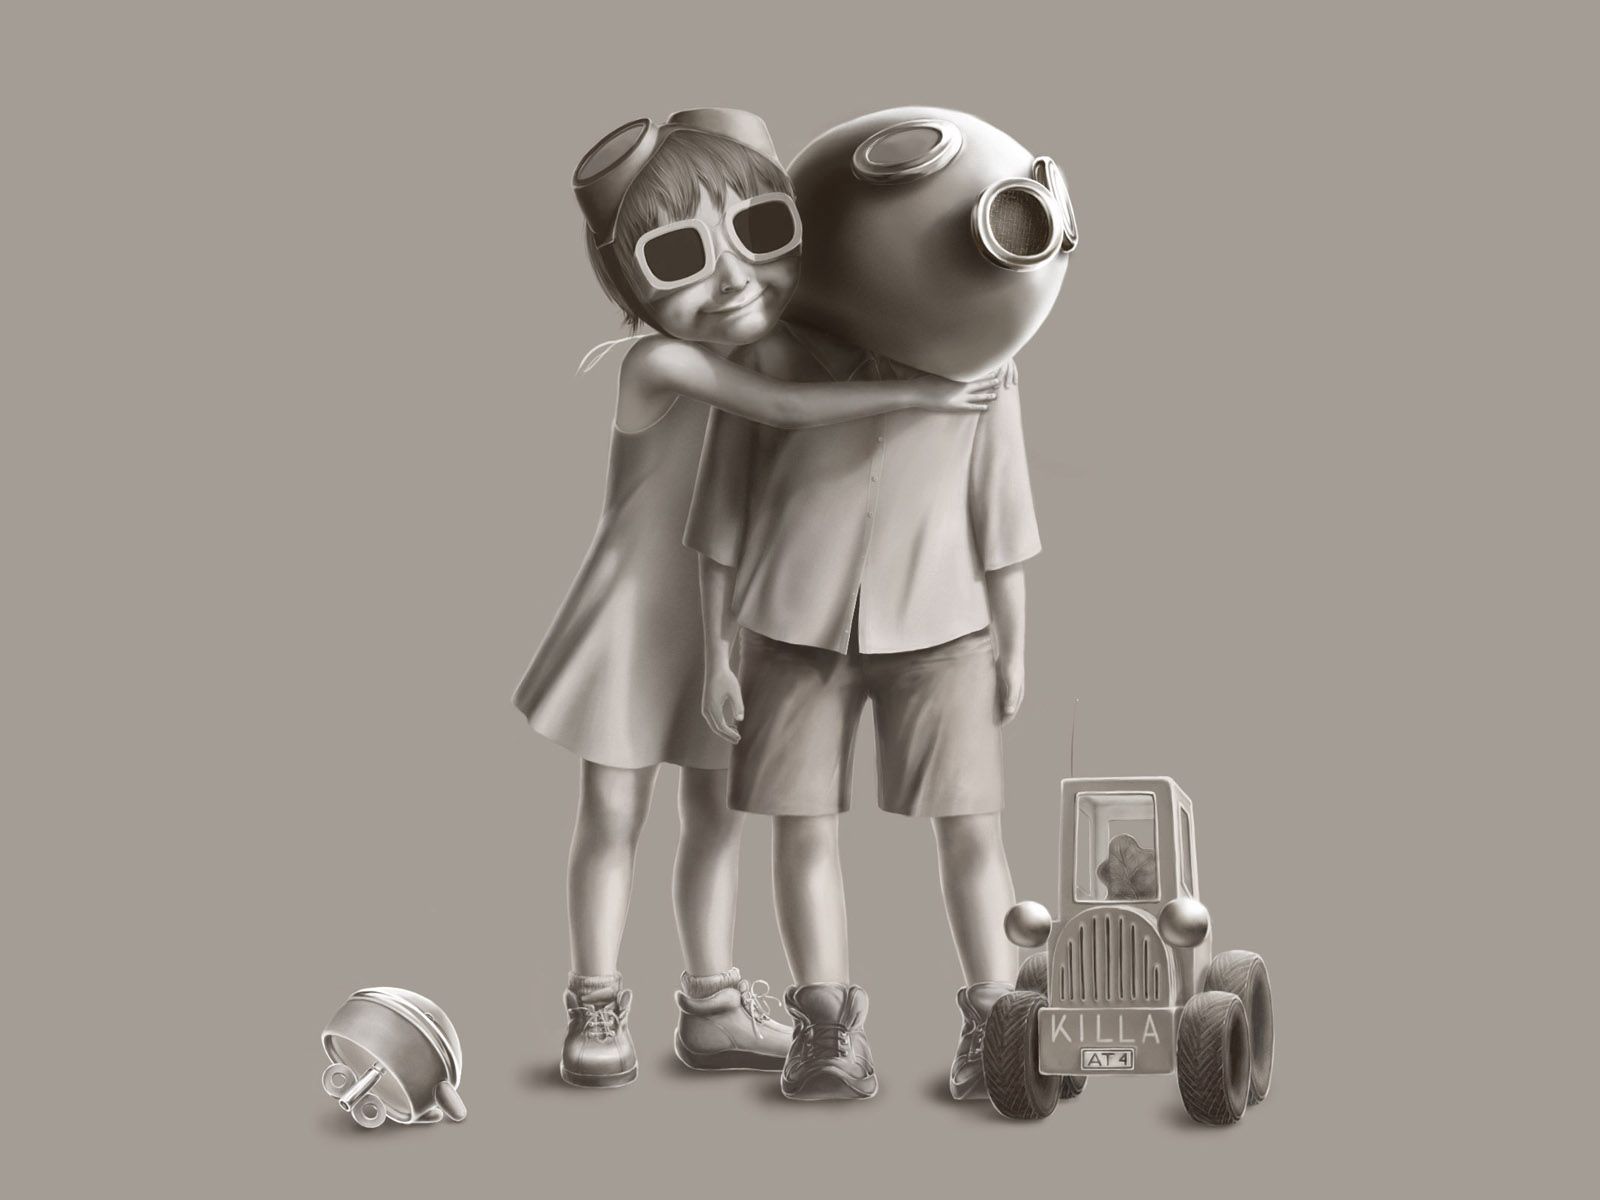 children, picture, car, mask, love, toys, couple, pair, drawing, machine, embrace High Definition image